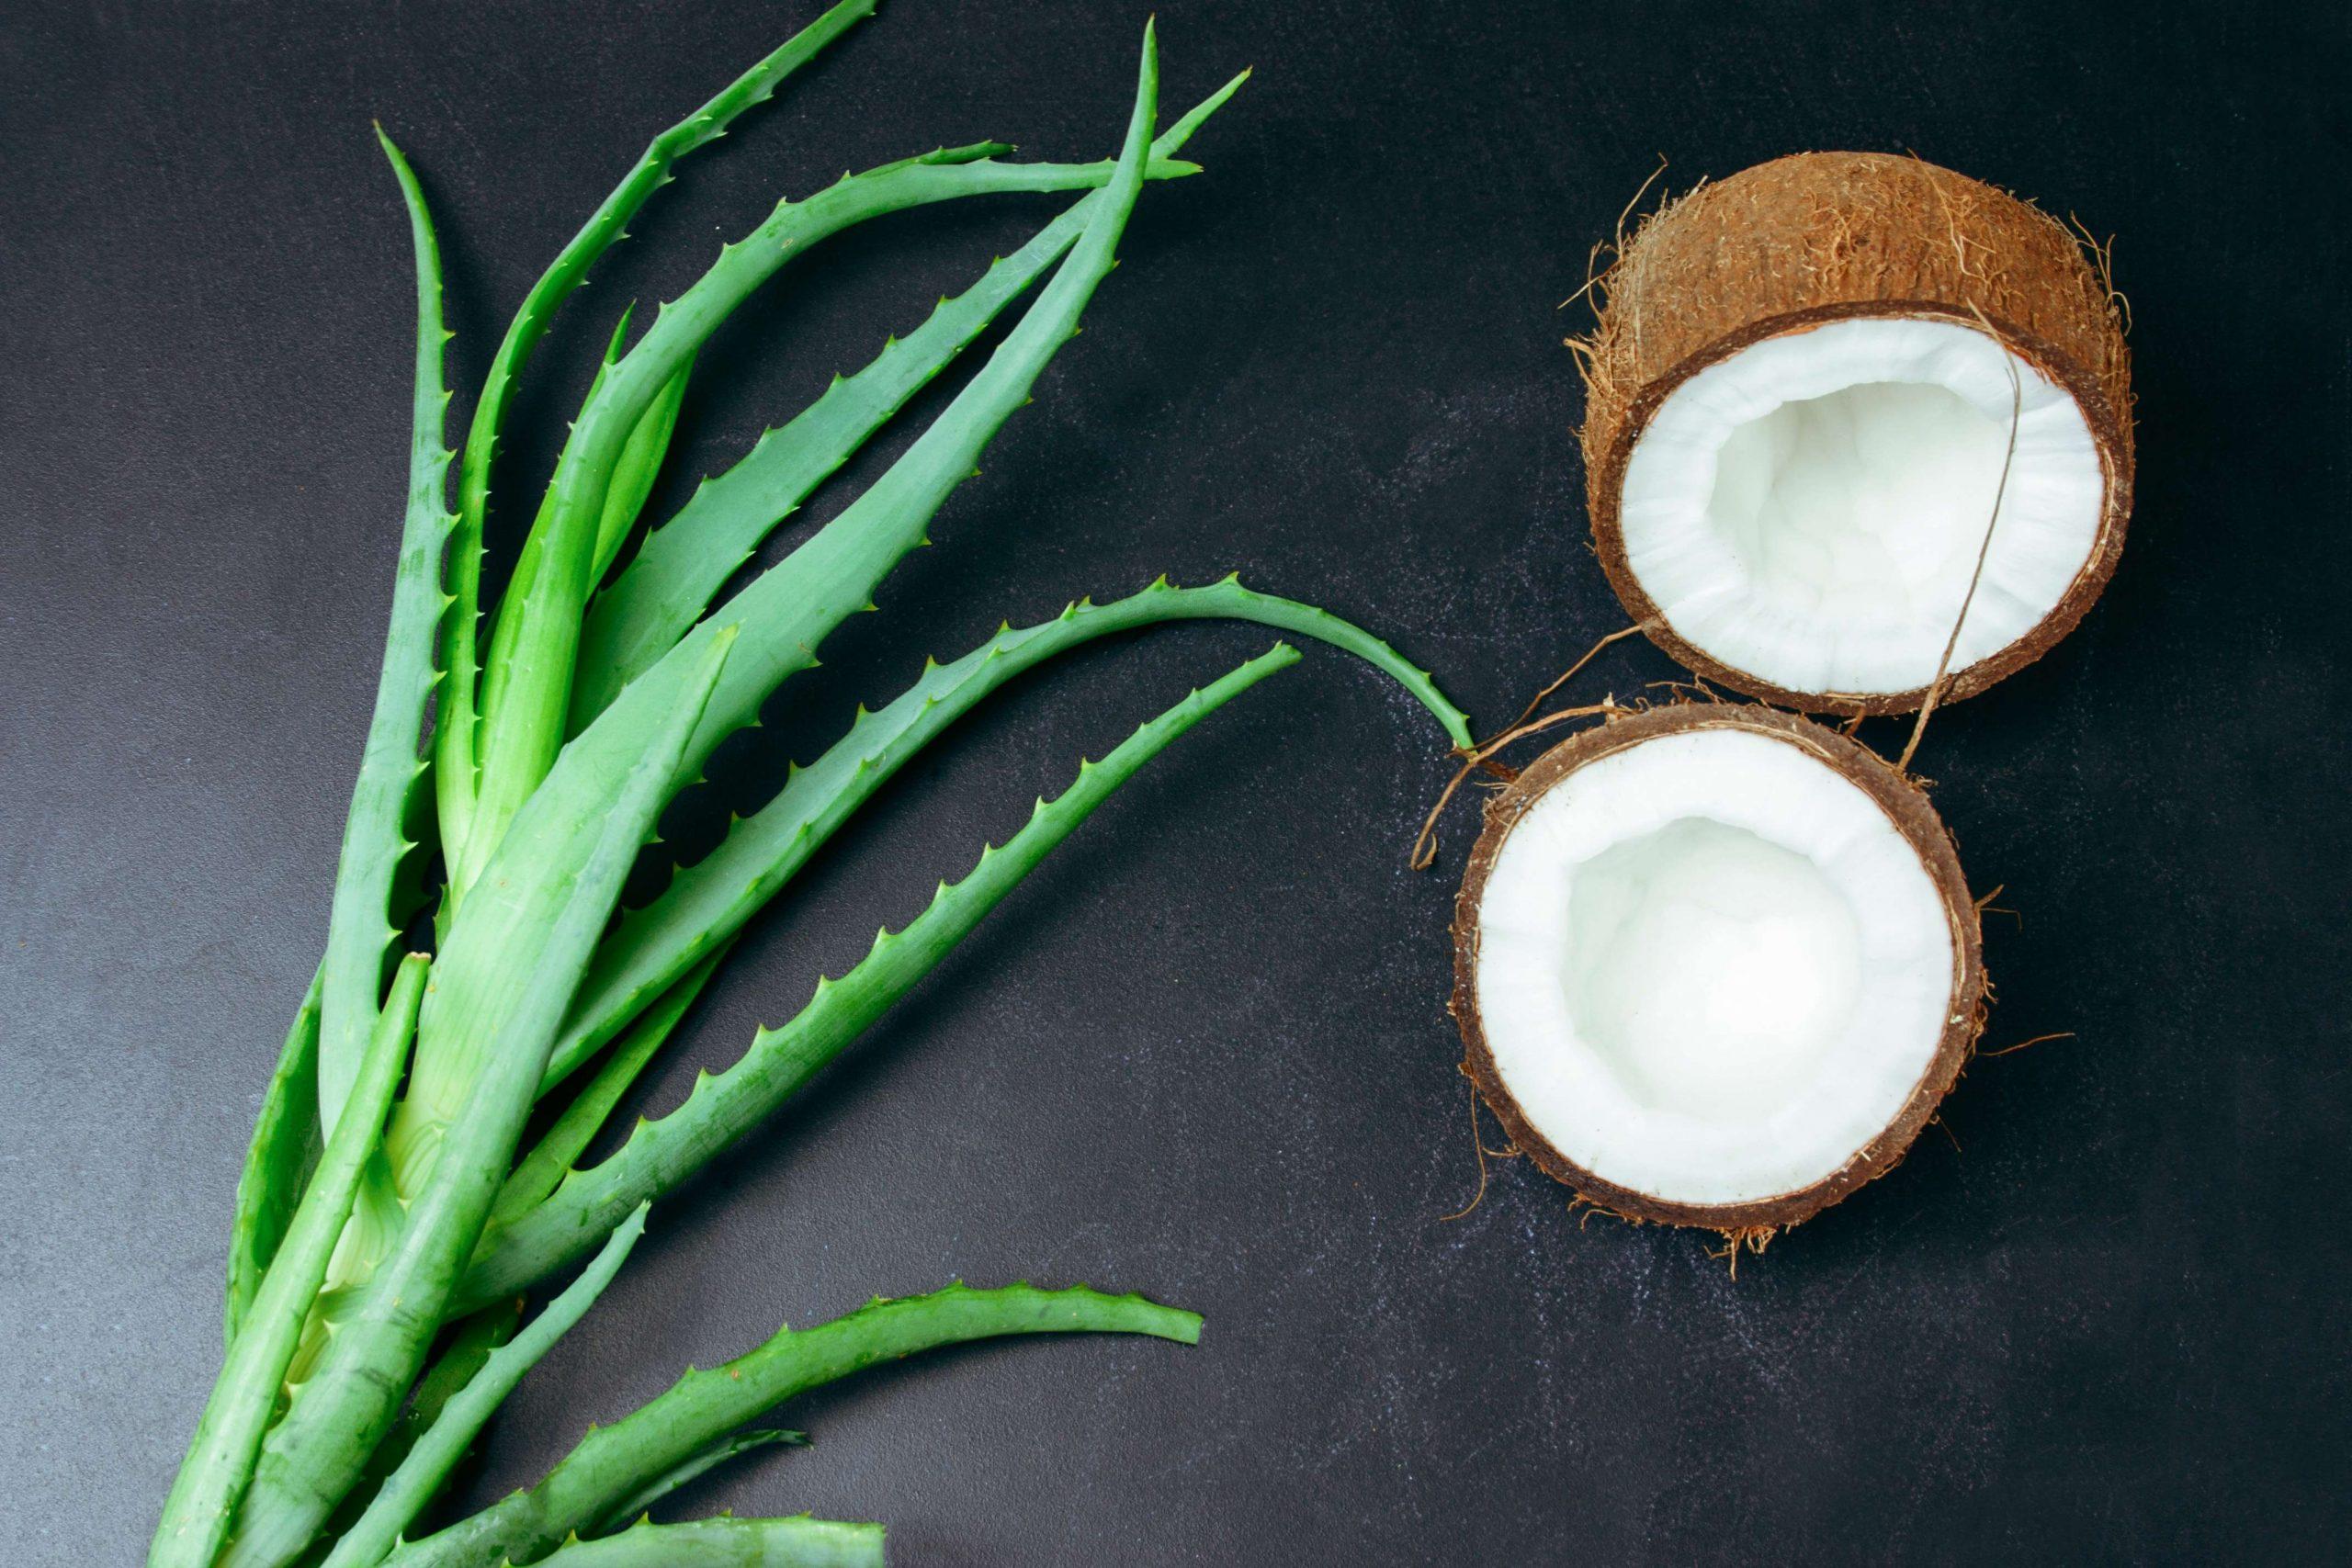 Coconut Aloe Vera Drink A Refreshing Blend of Nature's Goodness